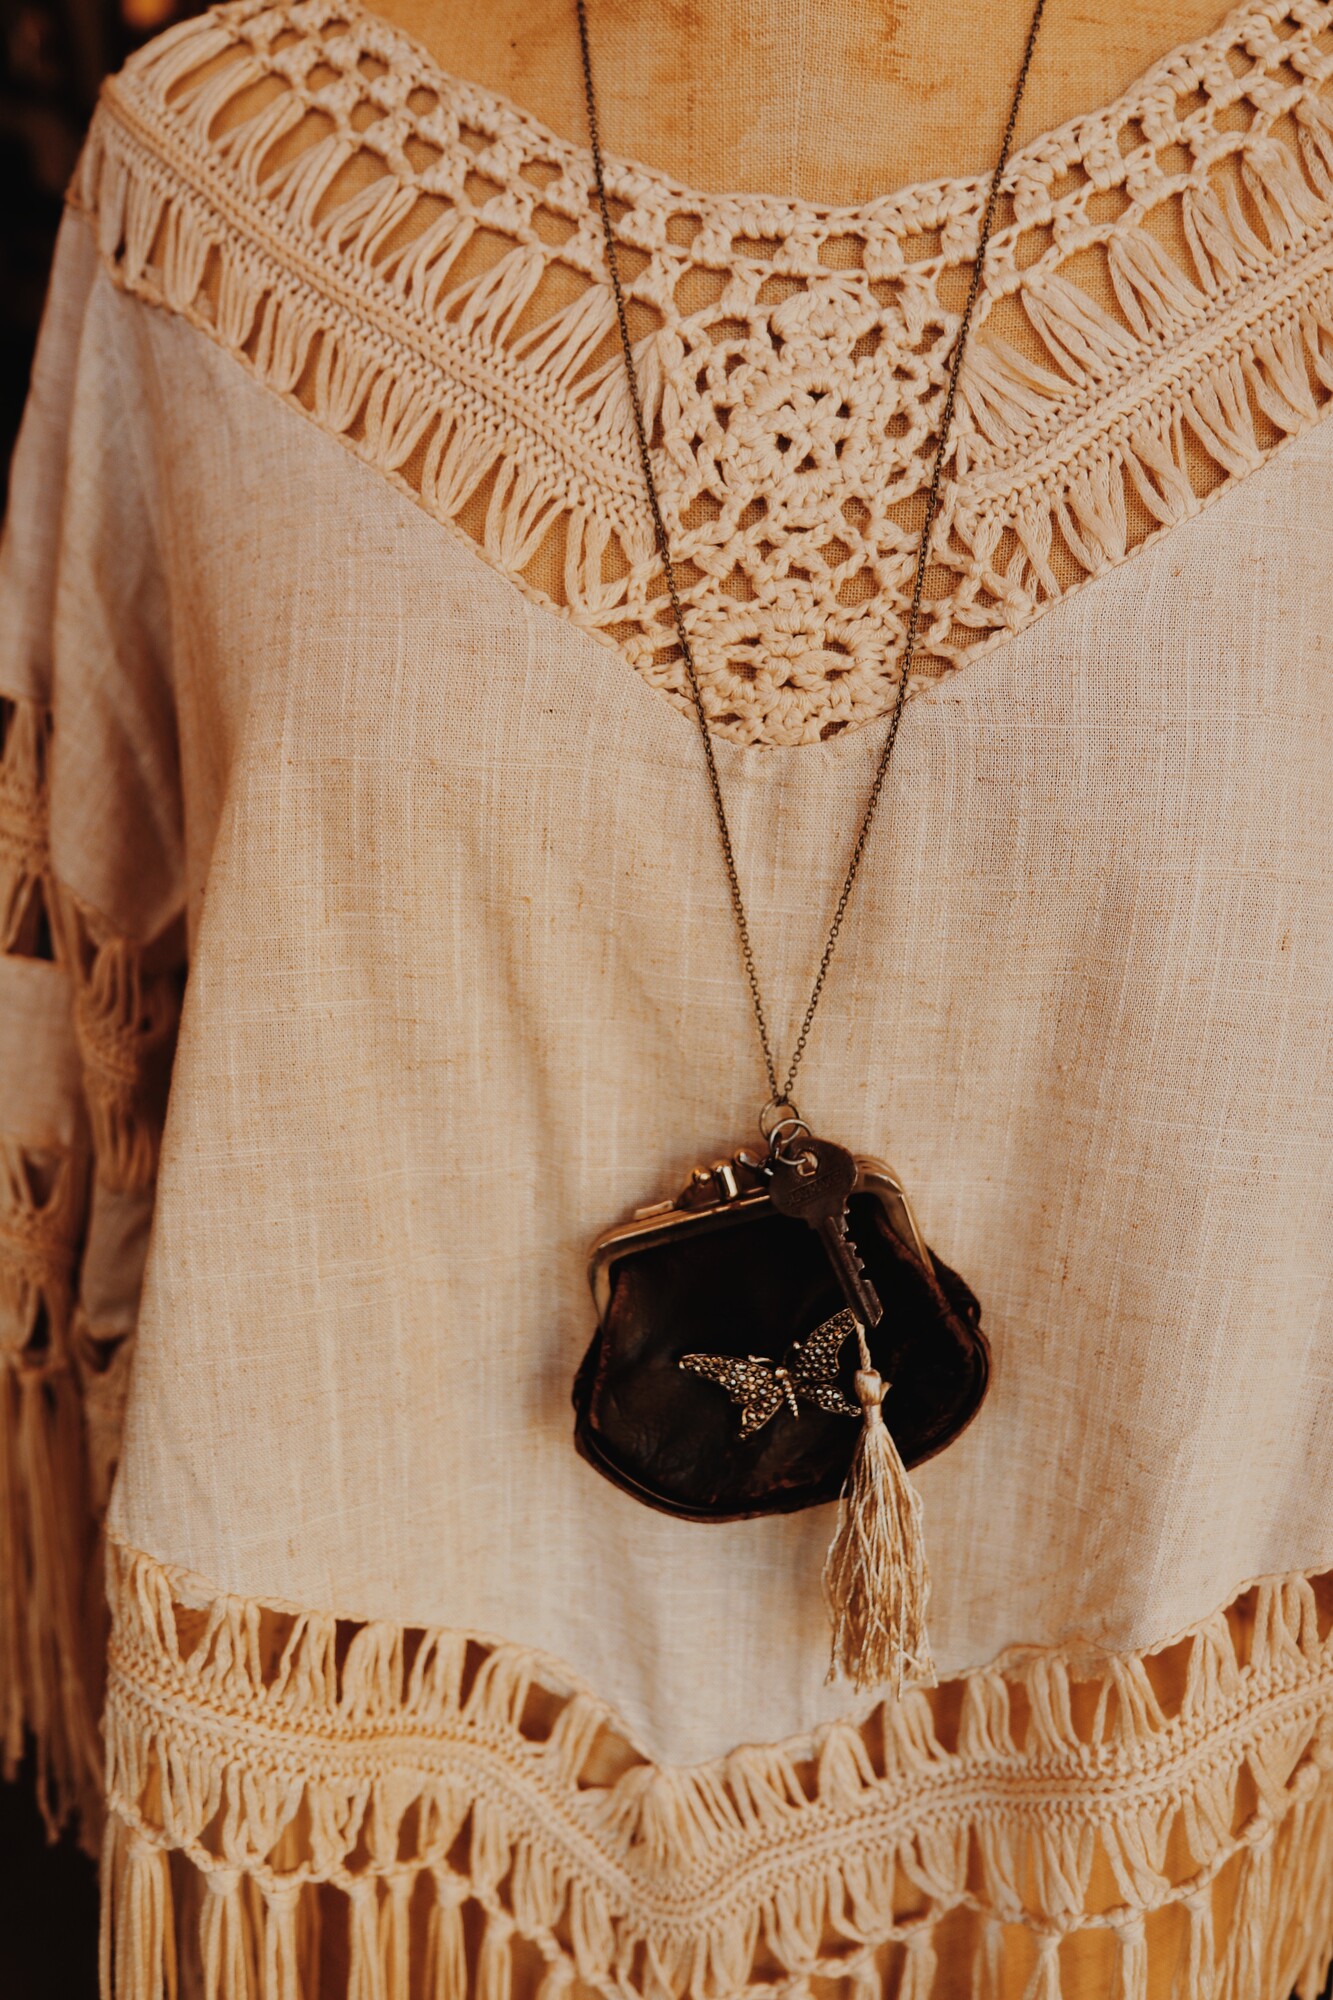 This hand crafted necklace was made from a vintage coin purse and hangs on a 32 inch chain. As well as the coin purse, there is a key and silver tassle.